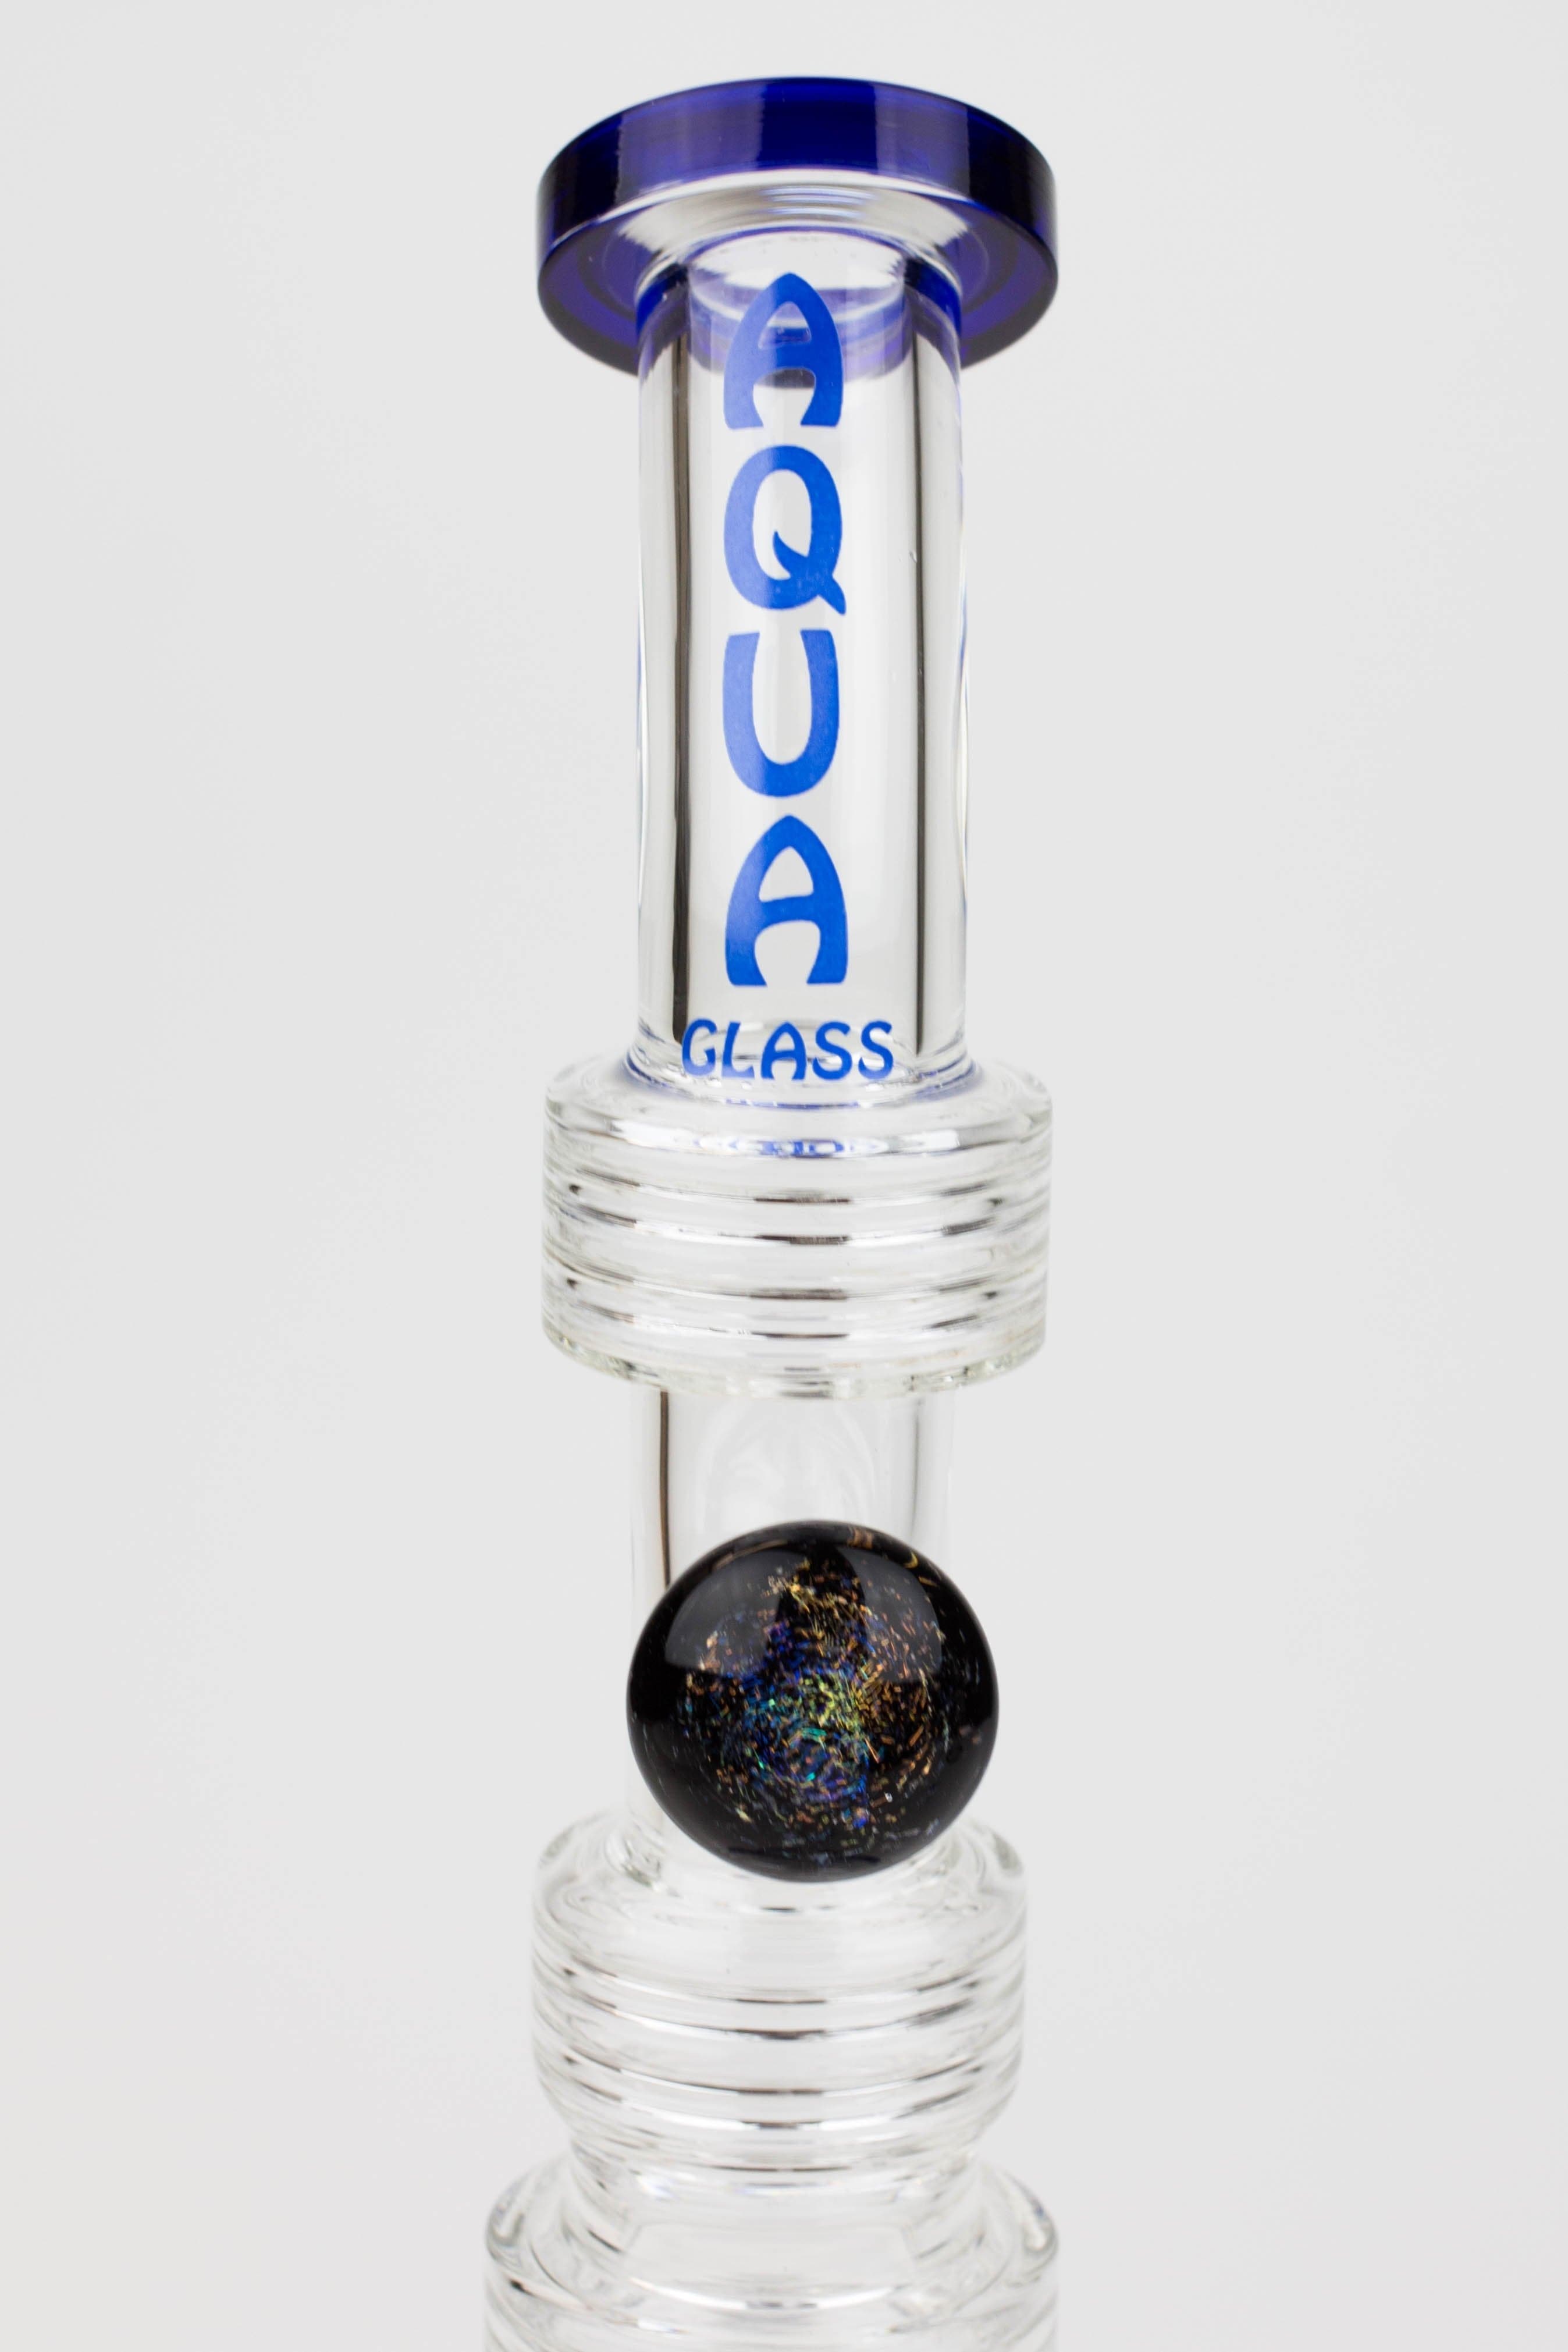 Aqua glass 2-in-1 glass water pipes_10